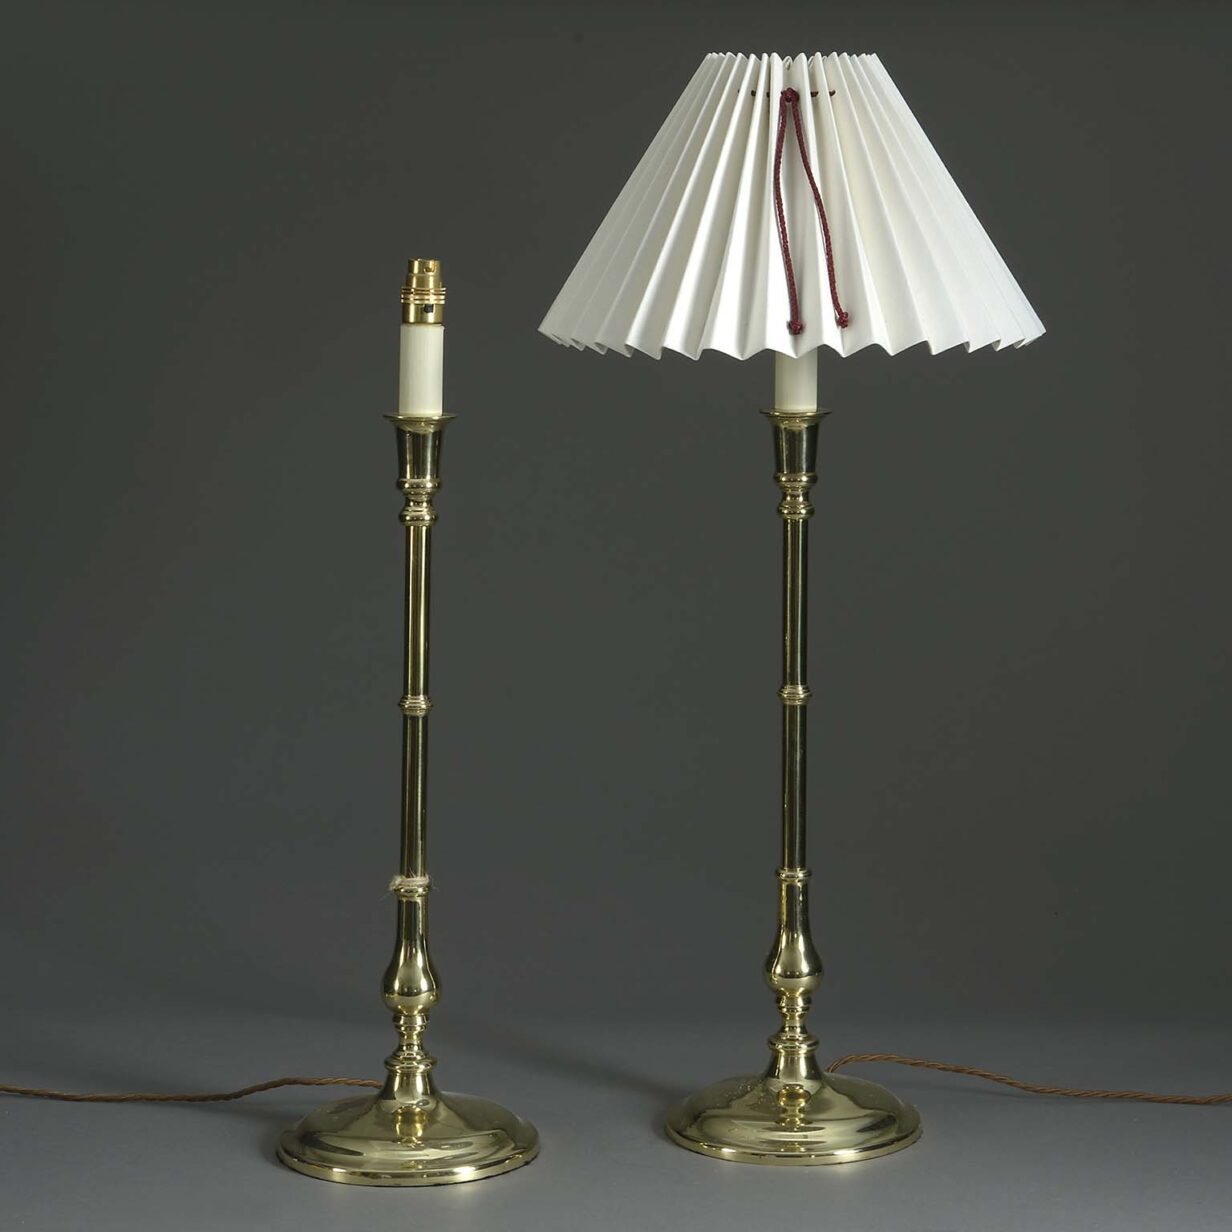 Pair of tall brass candlestick lamps